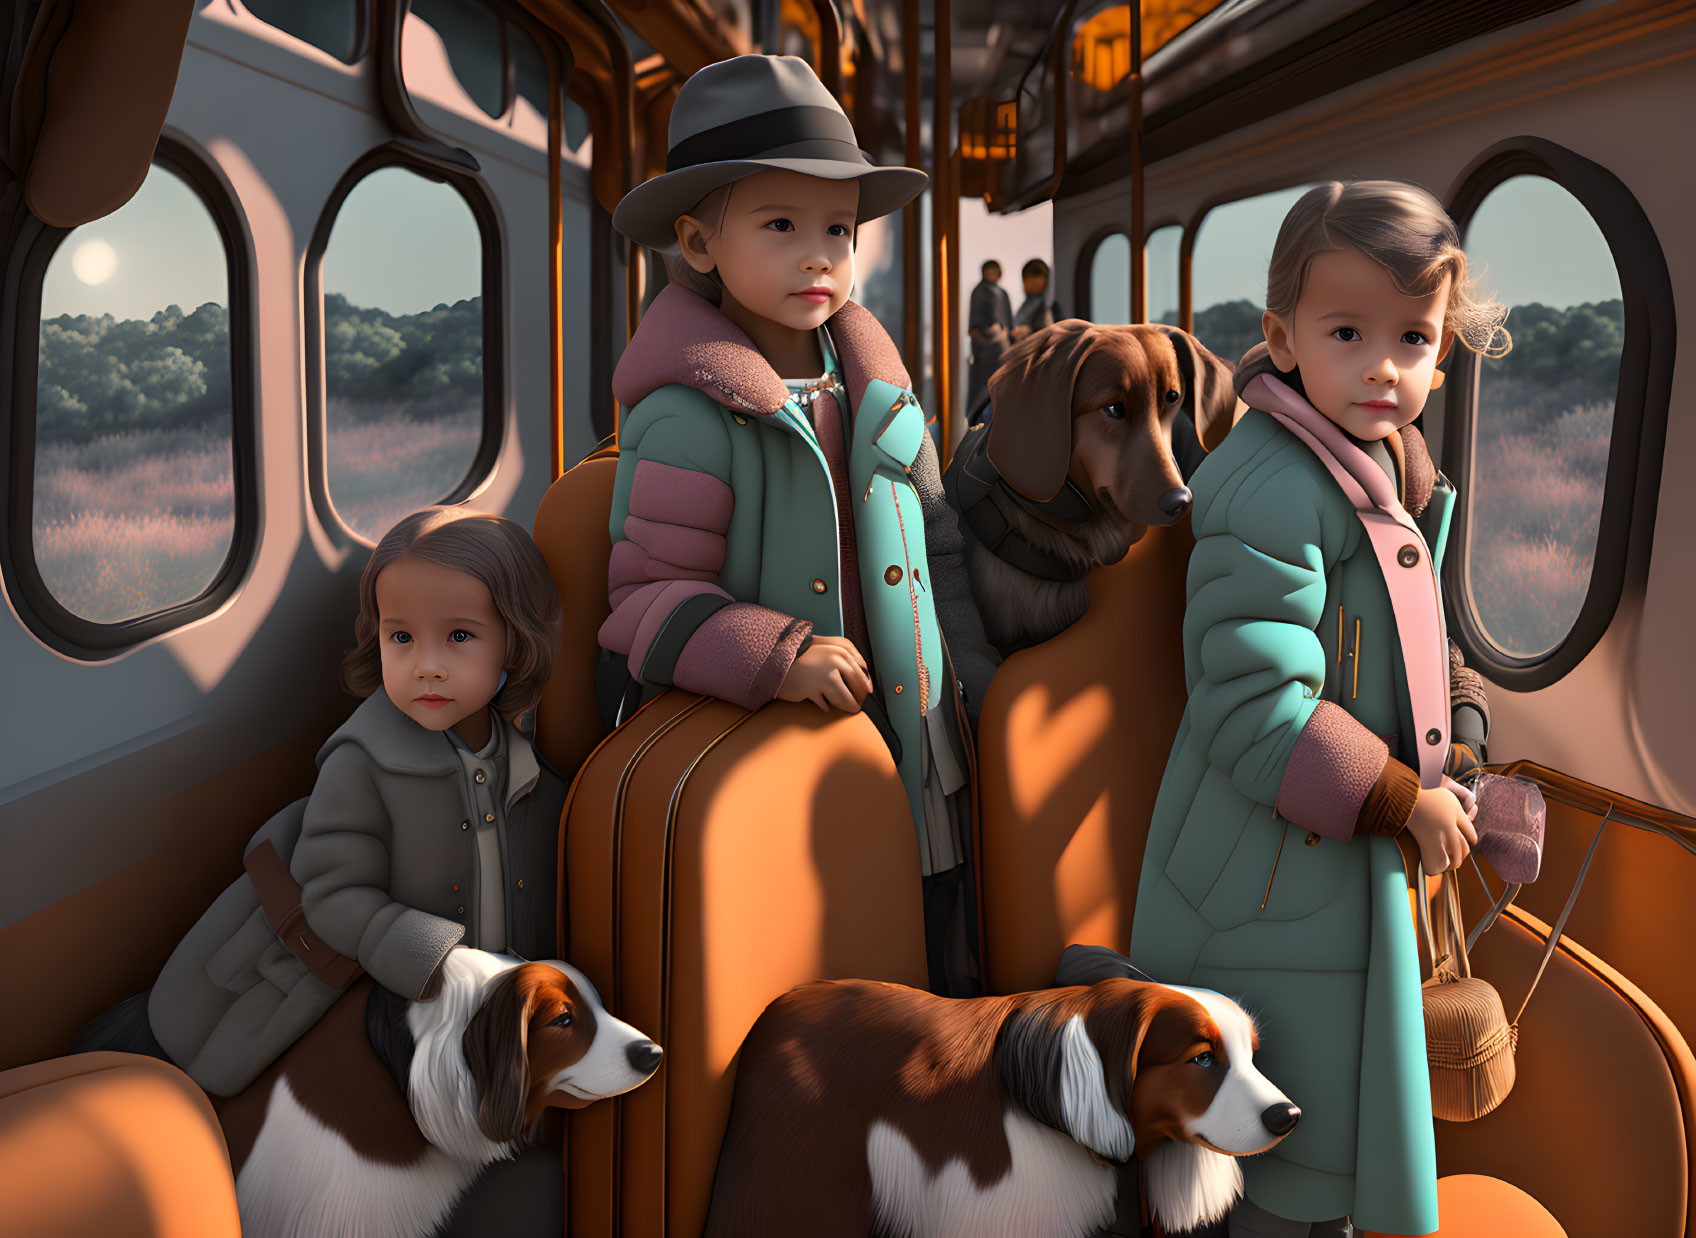 Animated children and dogs in train carriage with streaming light.